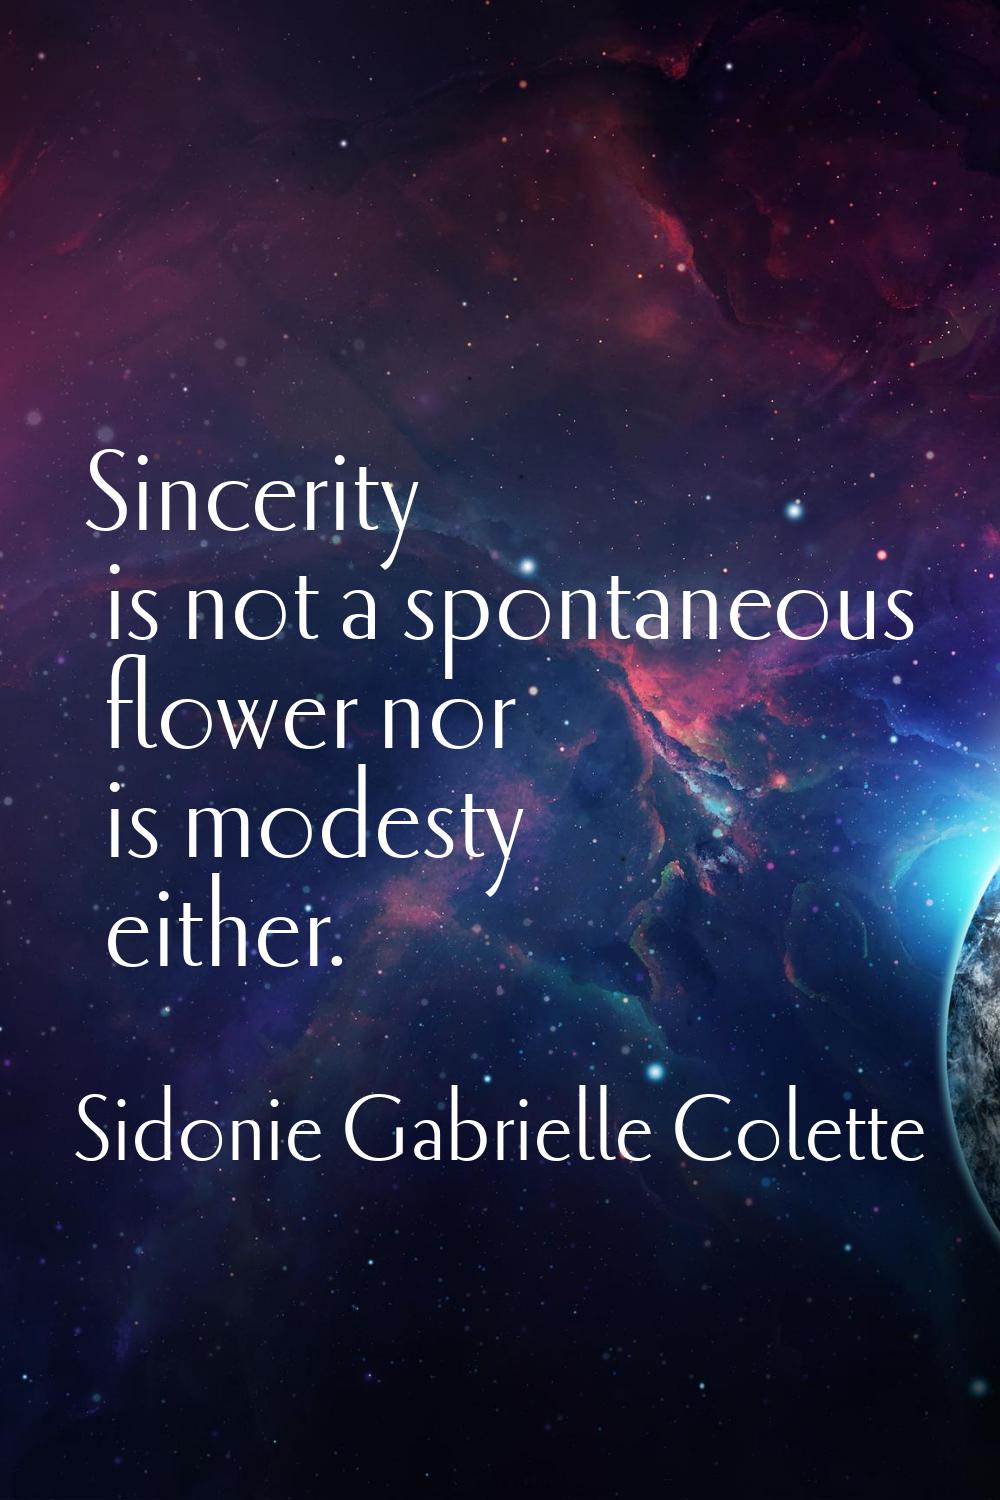 Sincerity is not a spontaneous flower nor is modesty either.